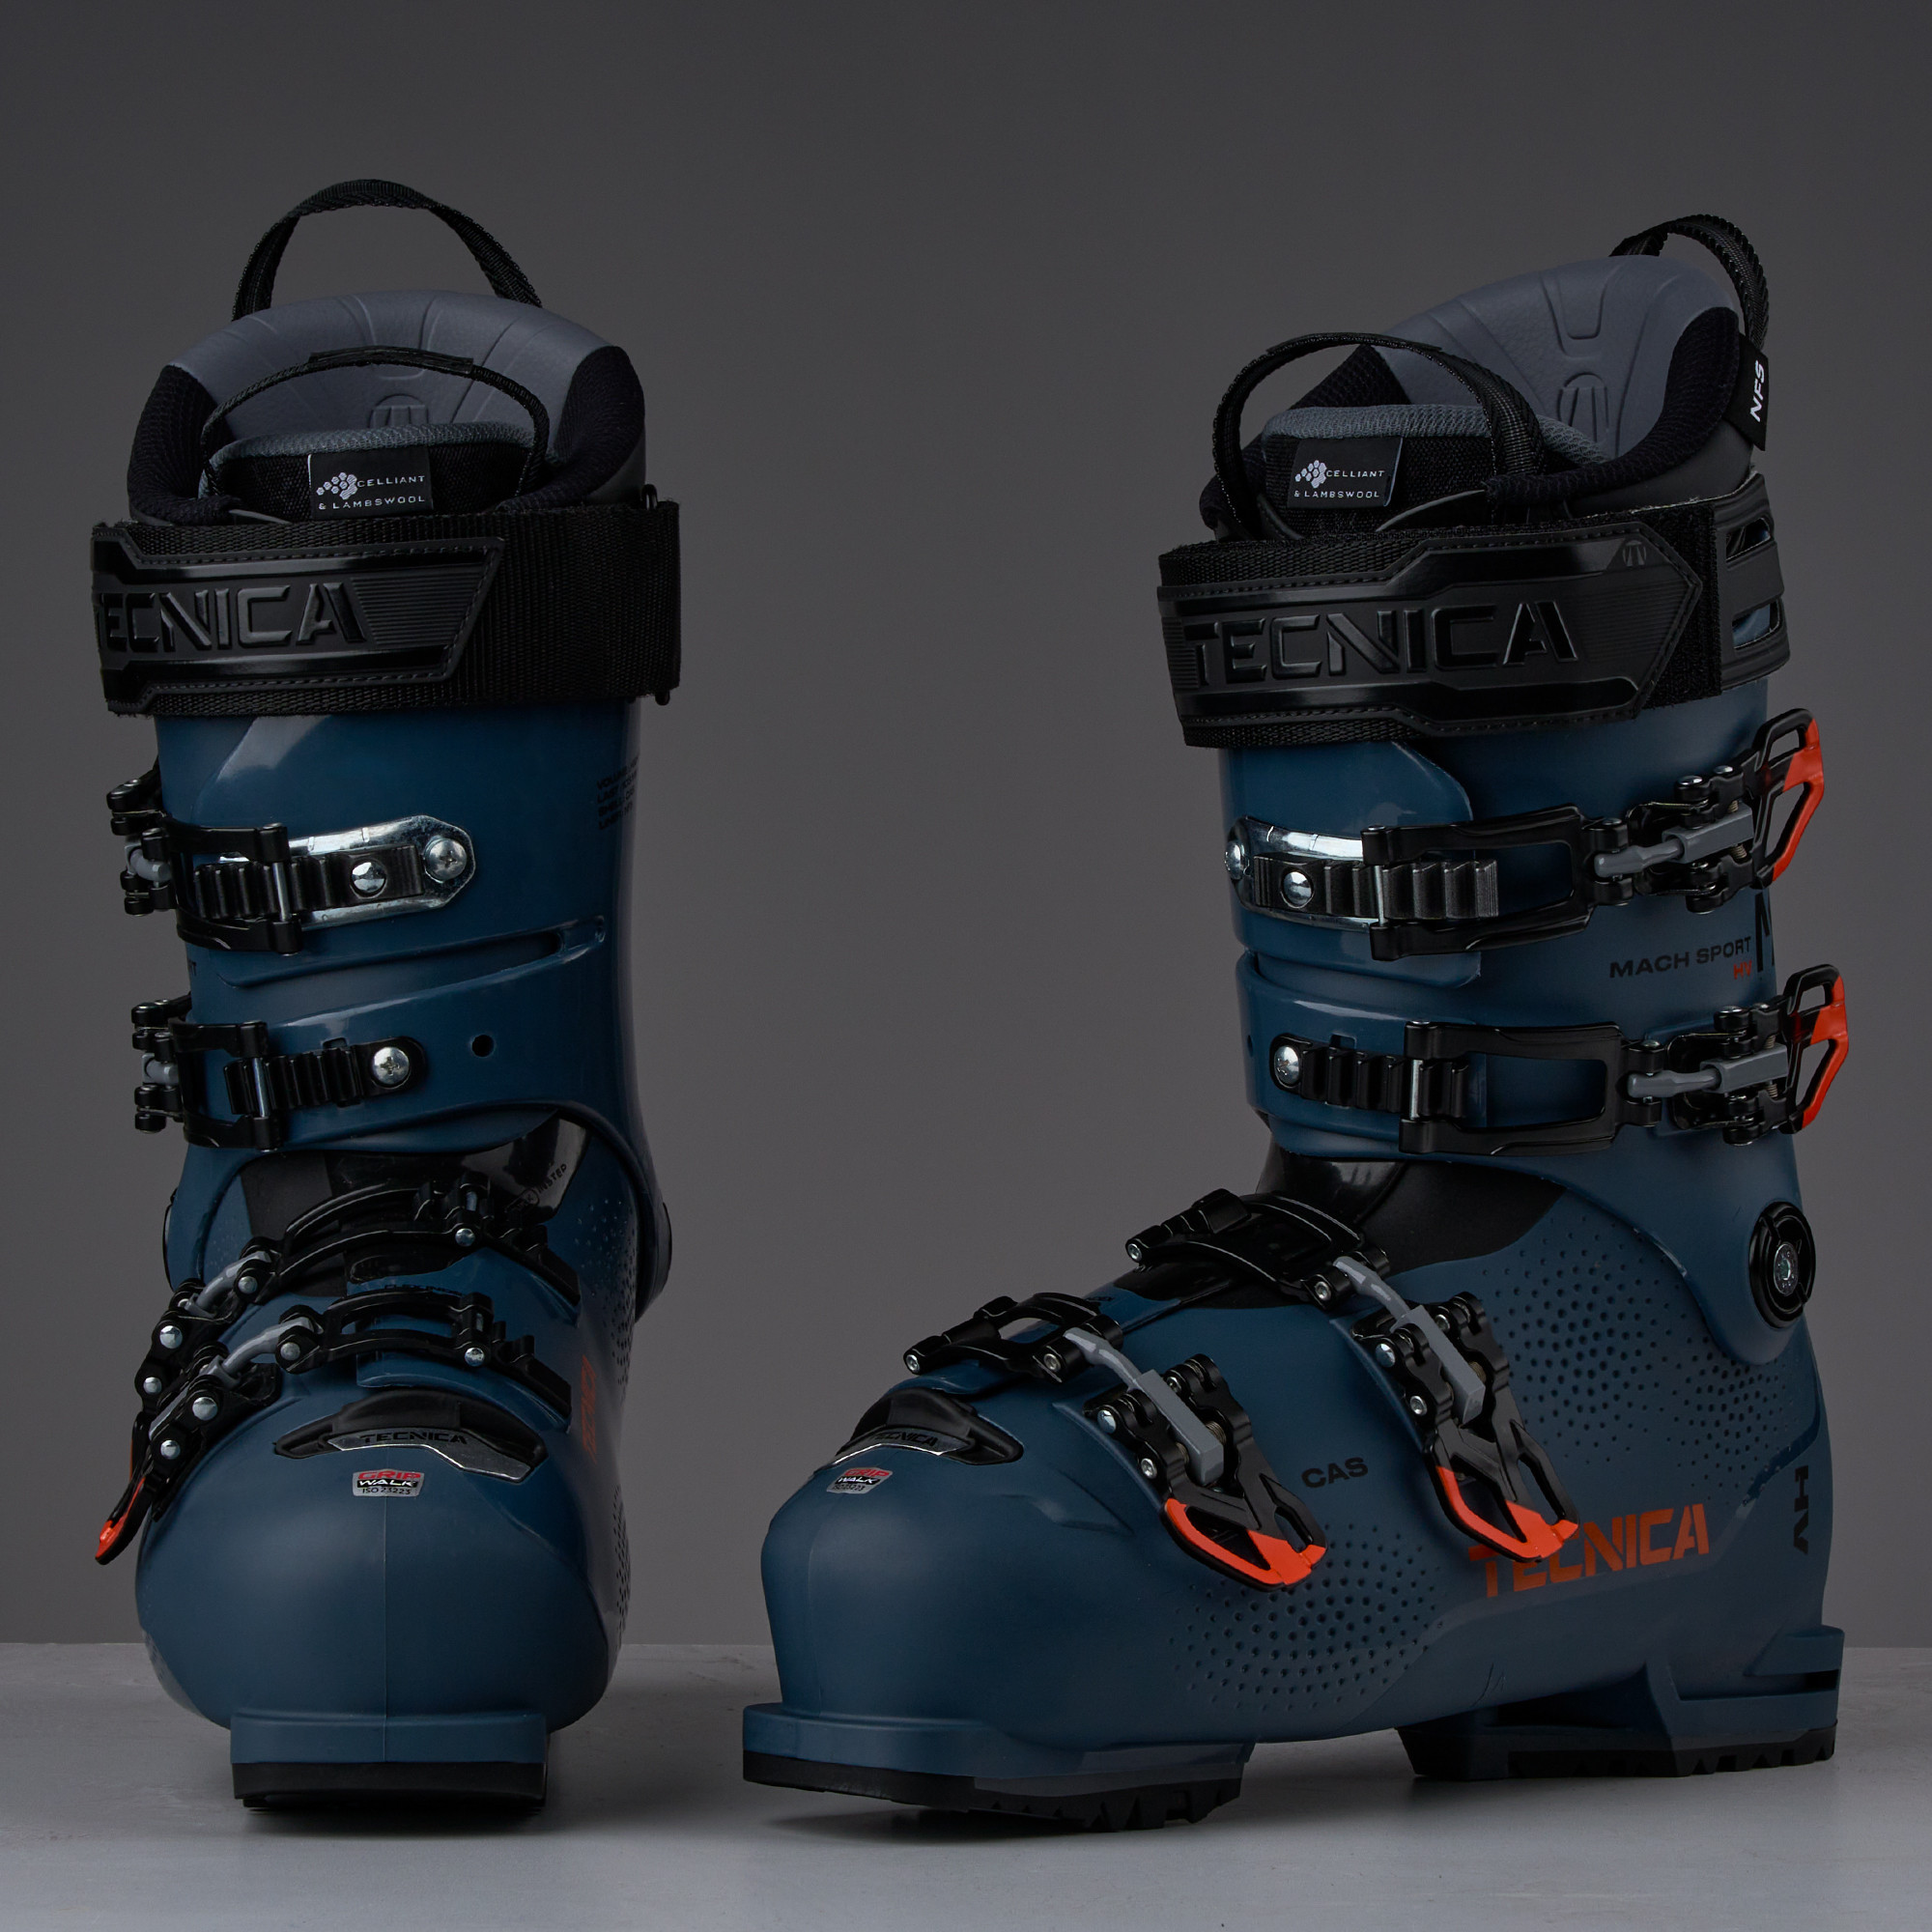 How to Find Ski Boots for Plus Size Calves - Blog